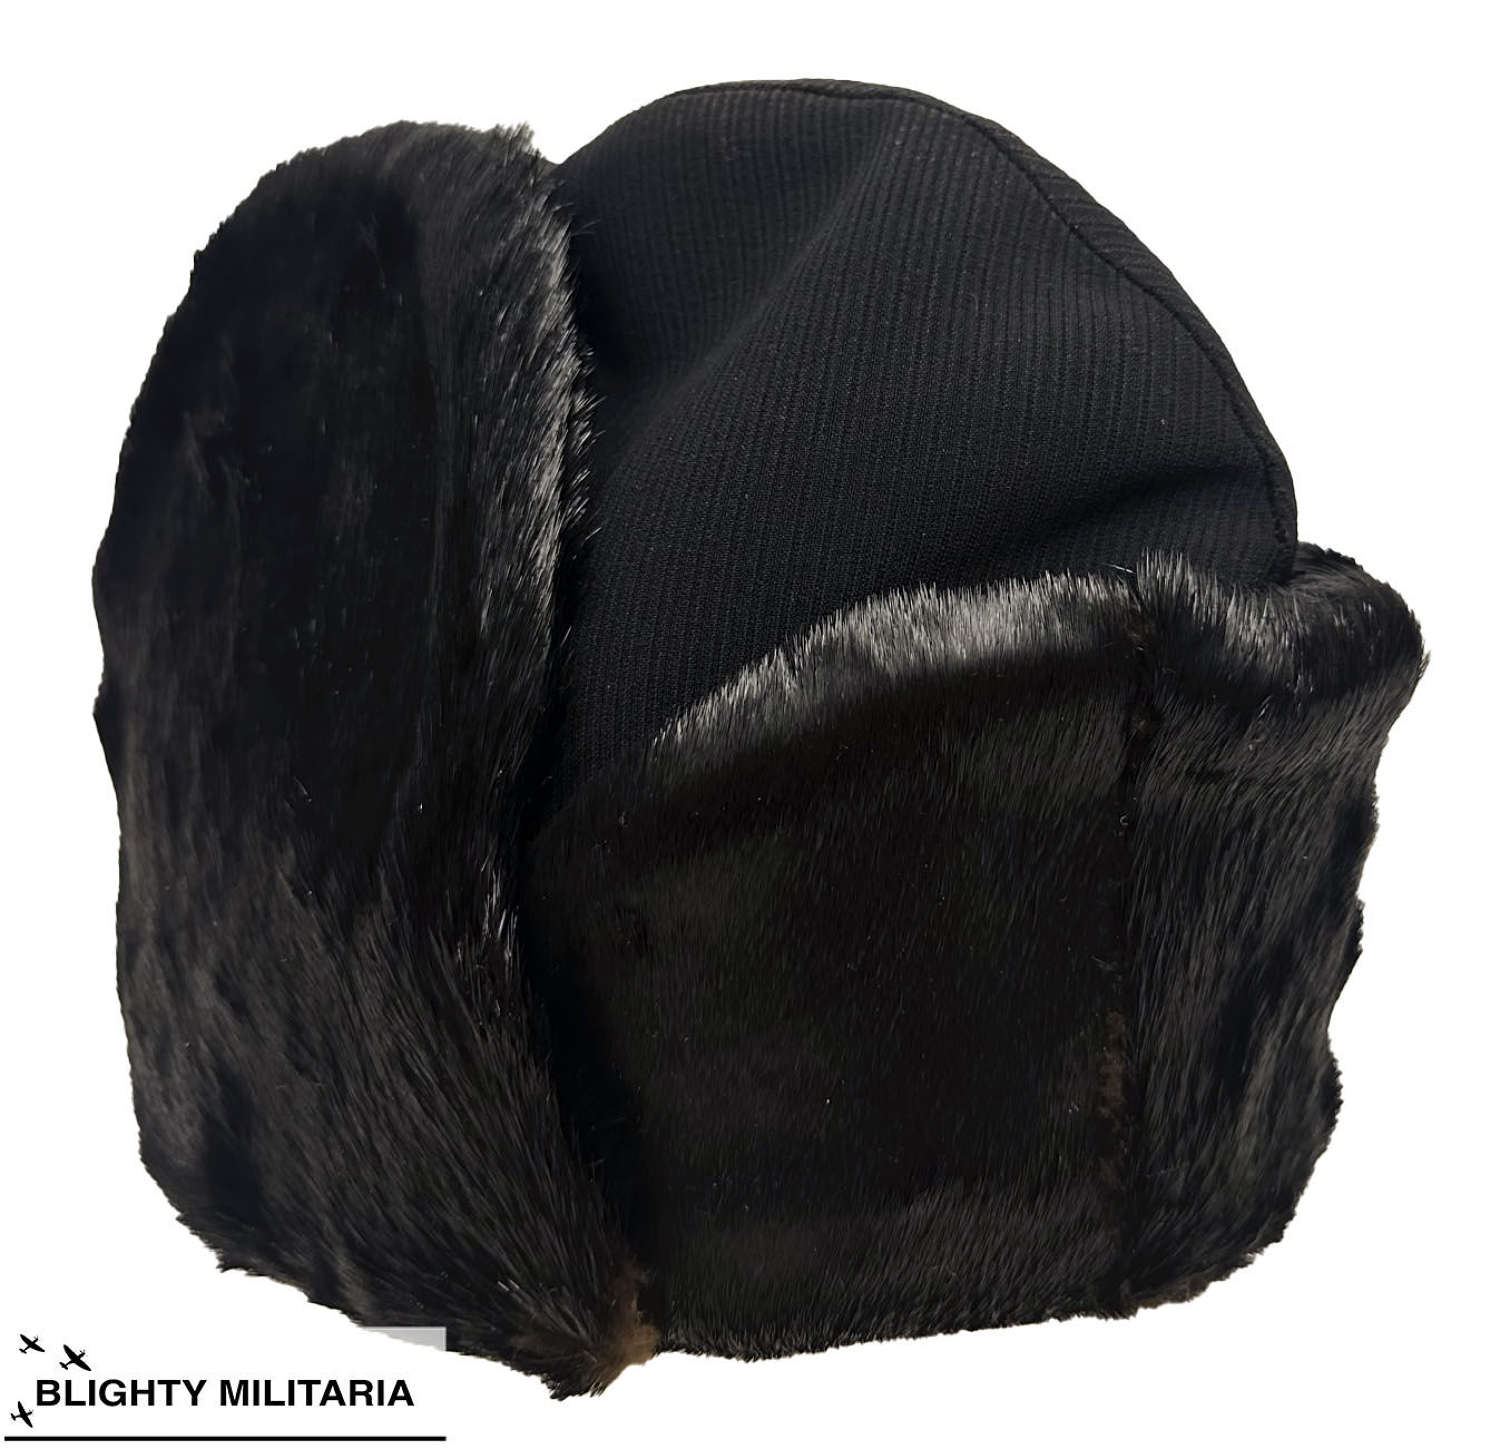 Original 1941 Dated Royal Navy Extreme Cold Weather Cap